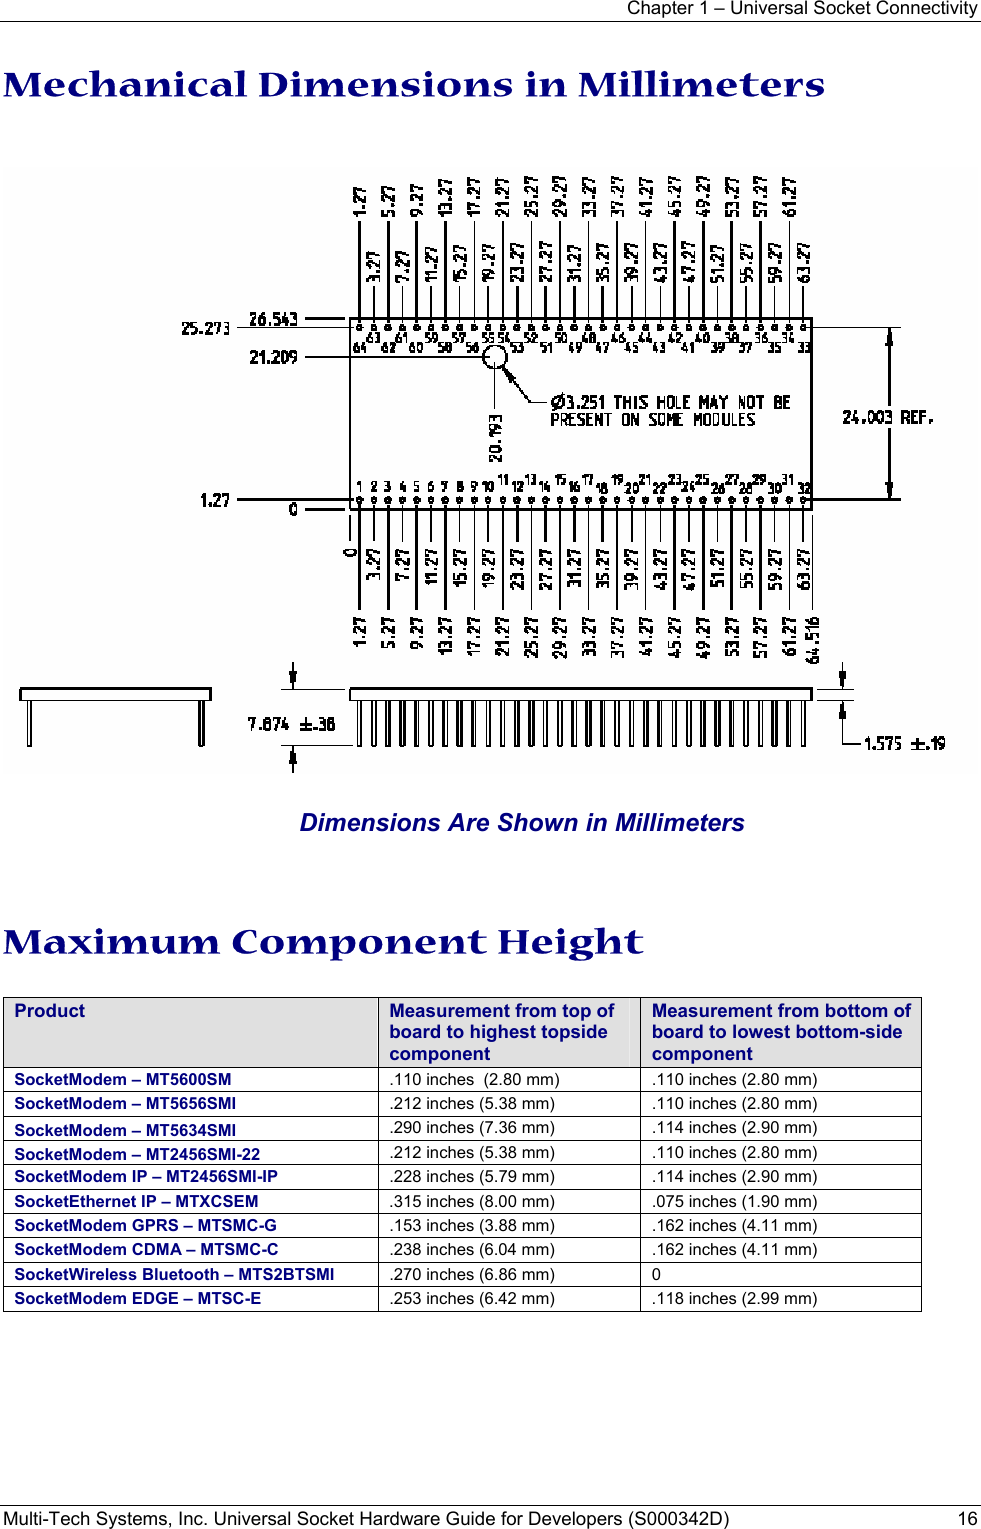 Chapter 1 – Universal Socket Connectivity Multi-Tech Systems, Inc. Universal Socket Hardware Guide for Developers (S000342D)  16  Mechanical Dimensions in Millimeters              Dimensions Are Shown in Millimeters   Maximum Component Height  Product  Measurement from top of board to highest topside component Measurement from bottom of board to lowest bottom-side component SocketModem – MT5600SM .110 inches  (2.80 mm) .110 inches (2.80 mm) SocketModem – MT5656SMI .212 inches (5.38 mm) .110 inches (2.80 mm) SocketModem – MT5634SMI  .290 inches (7.36 mm) .114 inches (2.90 mm) SocketModem – MT2456SMI-22  .212 inches (5.38 mm) .110 inches (2.80 mm) SocketModem IP – MT2456SMI-IP .228 inches (5.79 mm) .114 inches (2.90 mm) SocketEthernet IP – MTXCSEM .315 inches (8.00 mm) .075 inches (1.90 mm) SocketModem GPRS – MTSMC-G .153 inches (3.88 mm) .162 inches (4.11 mm) SocketModem CDMA – MTSMC-C .238 inches (6.04 mm)  .162 inches (4.11 mm) SocketWireless Bluetooth – MTS2BTSMI .270 inches (6.86 mm) 0 SocketModem EDGE – MTSC-E  .253 inches (6.42 mm)  .118 inches (2.99 mm)   